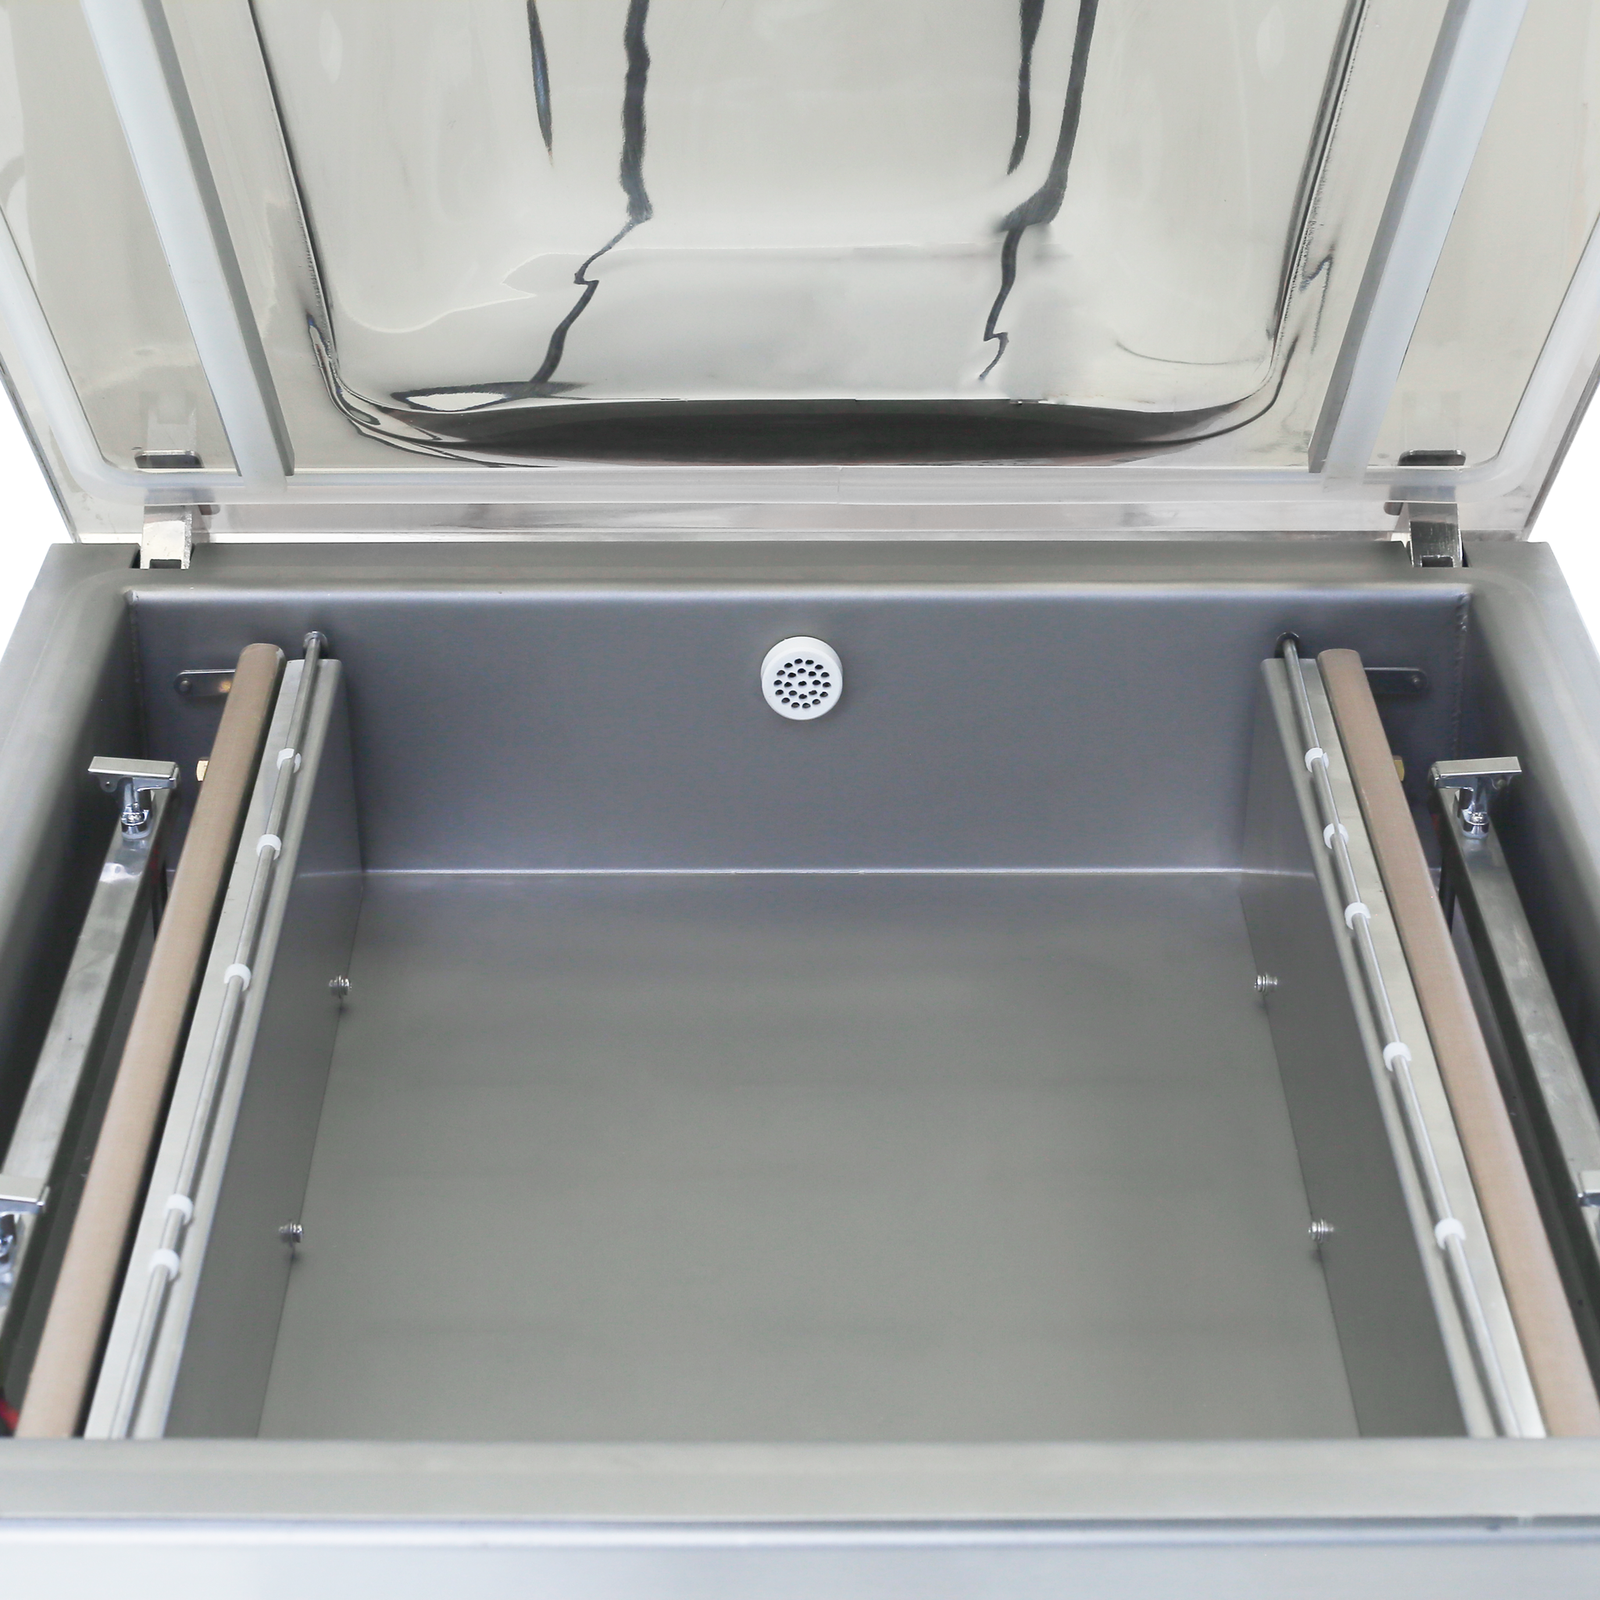 the stainless steel commercial single chamber vacuum sealer with two 20 inch sealing bars. 2 sealing elements,  4 gas flush connectors and the round vacuum vent are on the inside of the vacuum chamber.